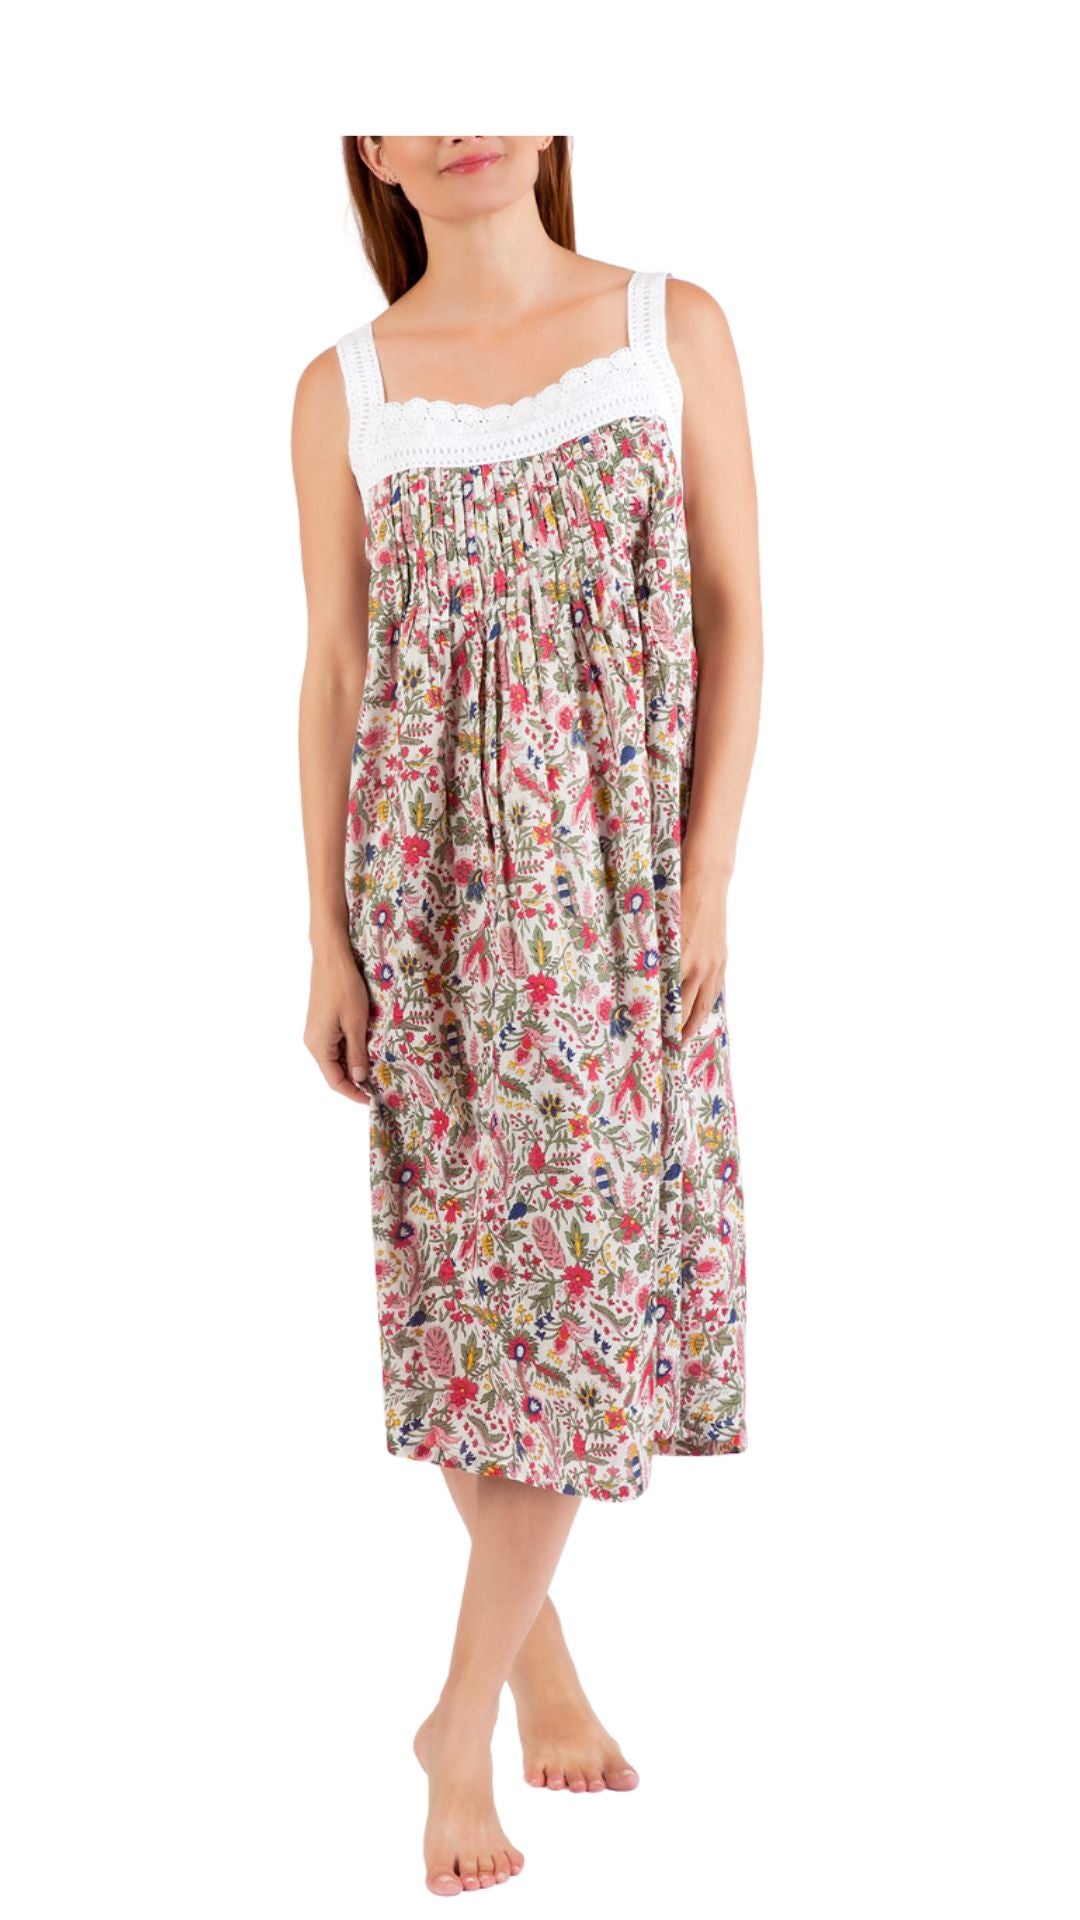 Floral cotton nightgown on model